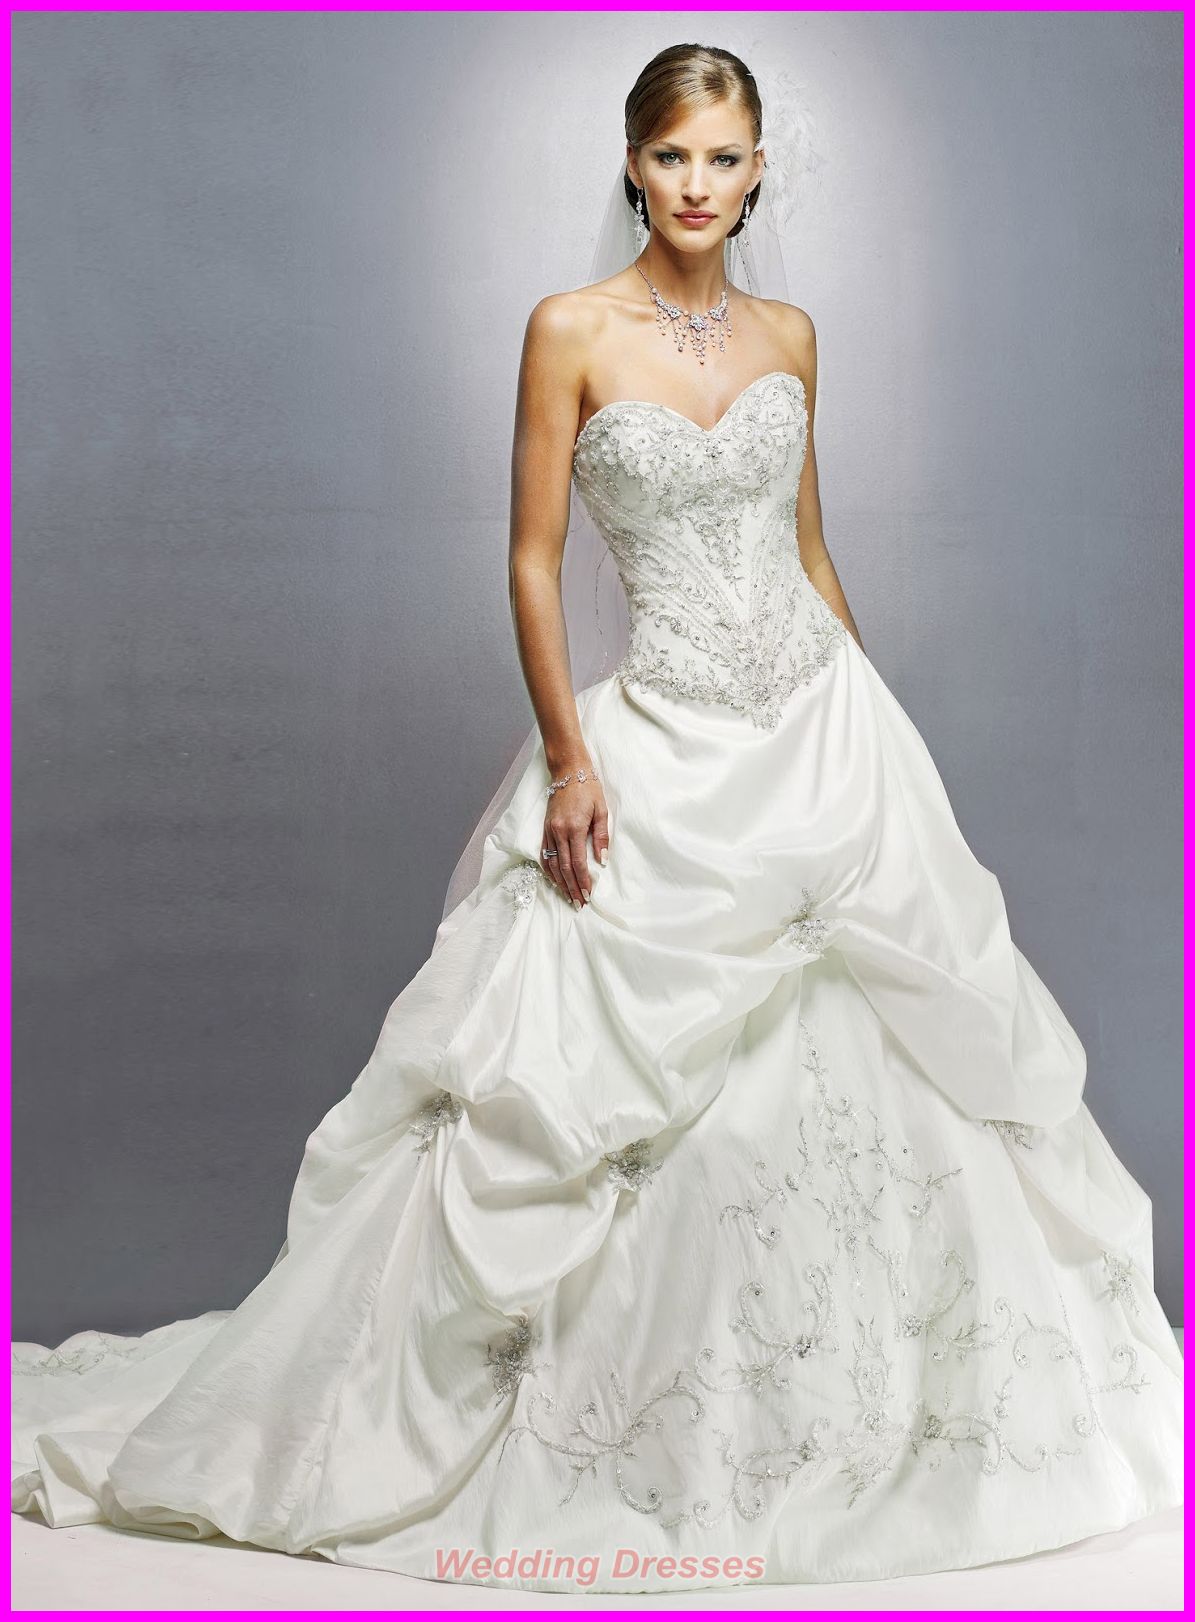 Top Famous Most Expensive Wedding Dresses Design for Ladies